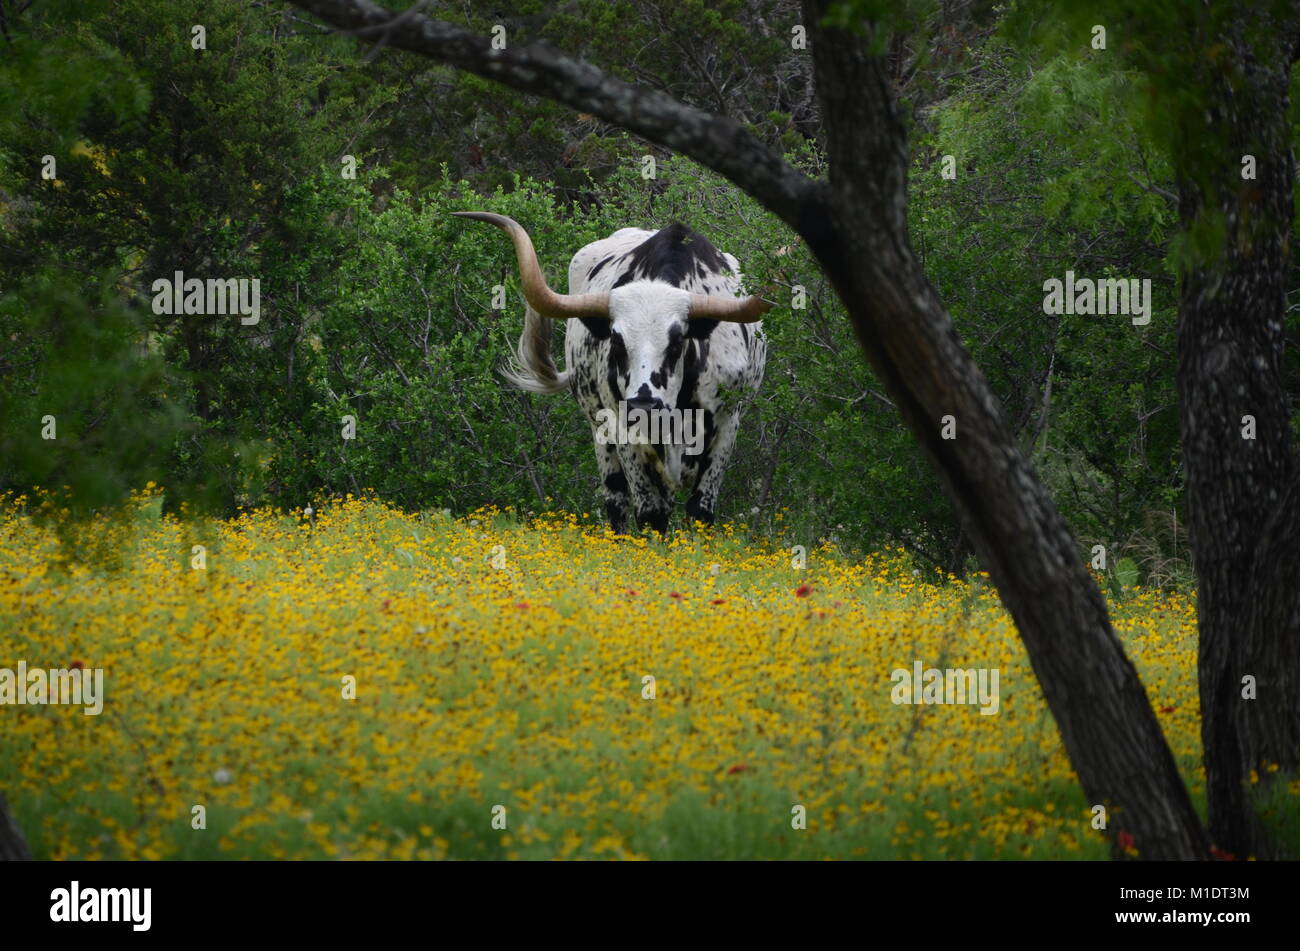 a black and white texan longhorn cow walks through a texas wildflower covered field Stock Photo